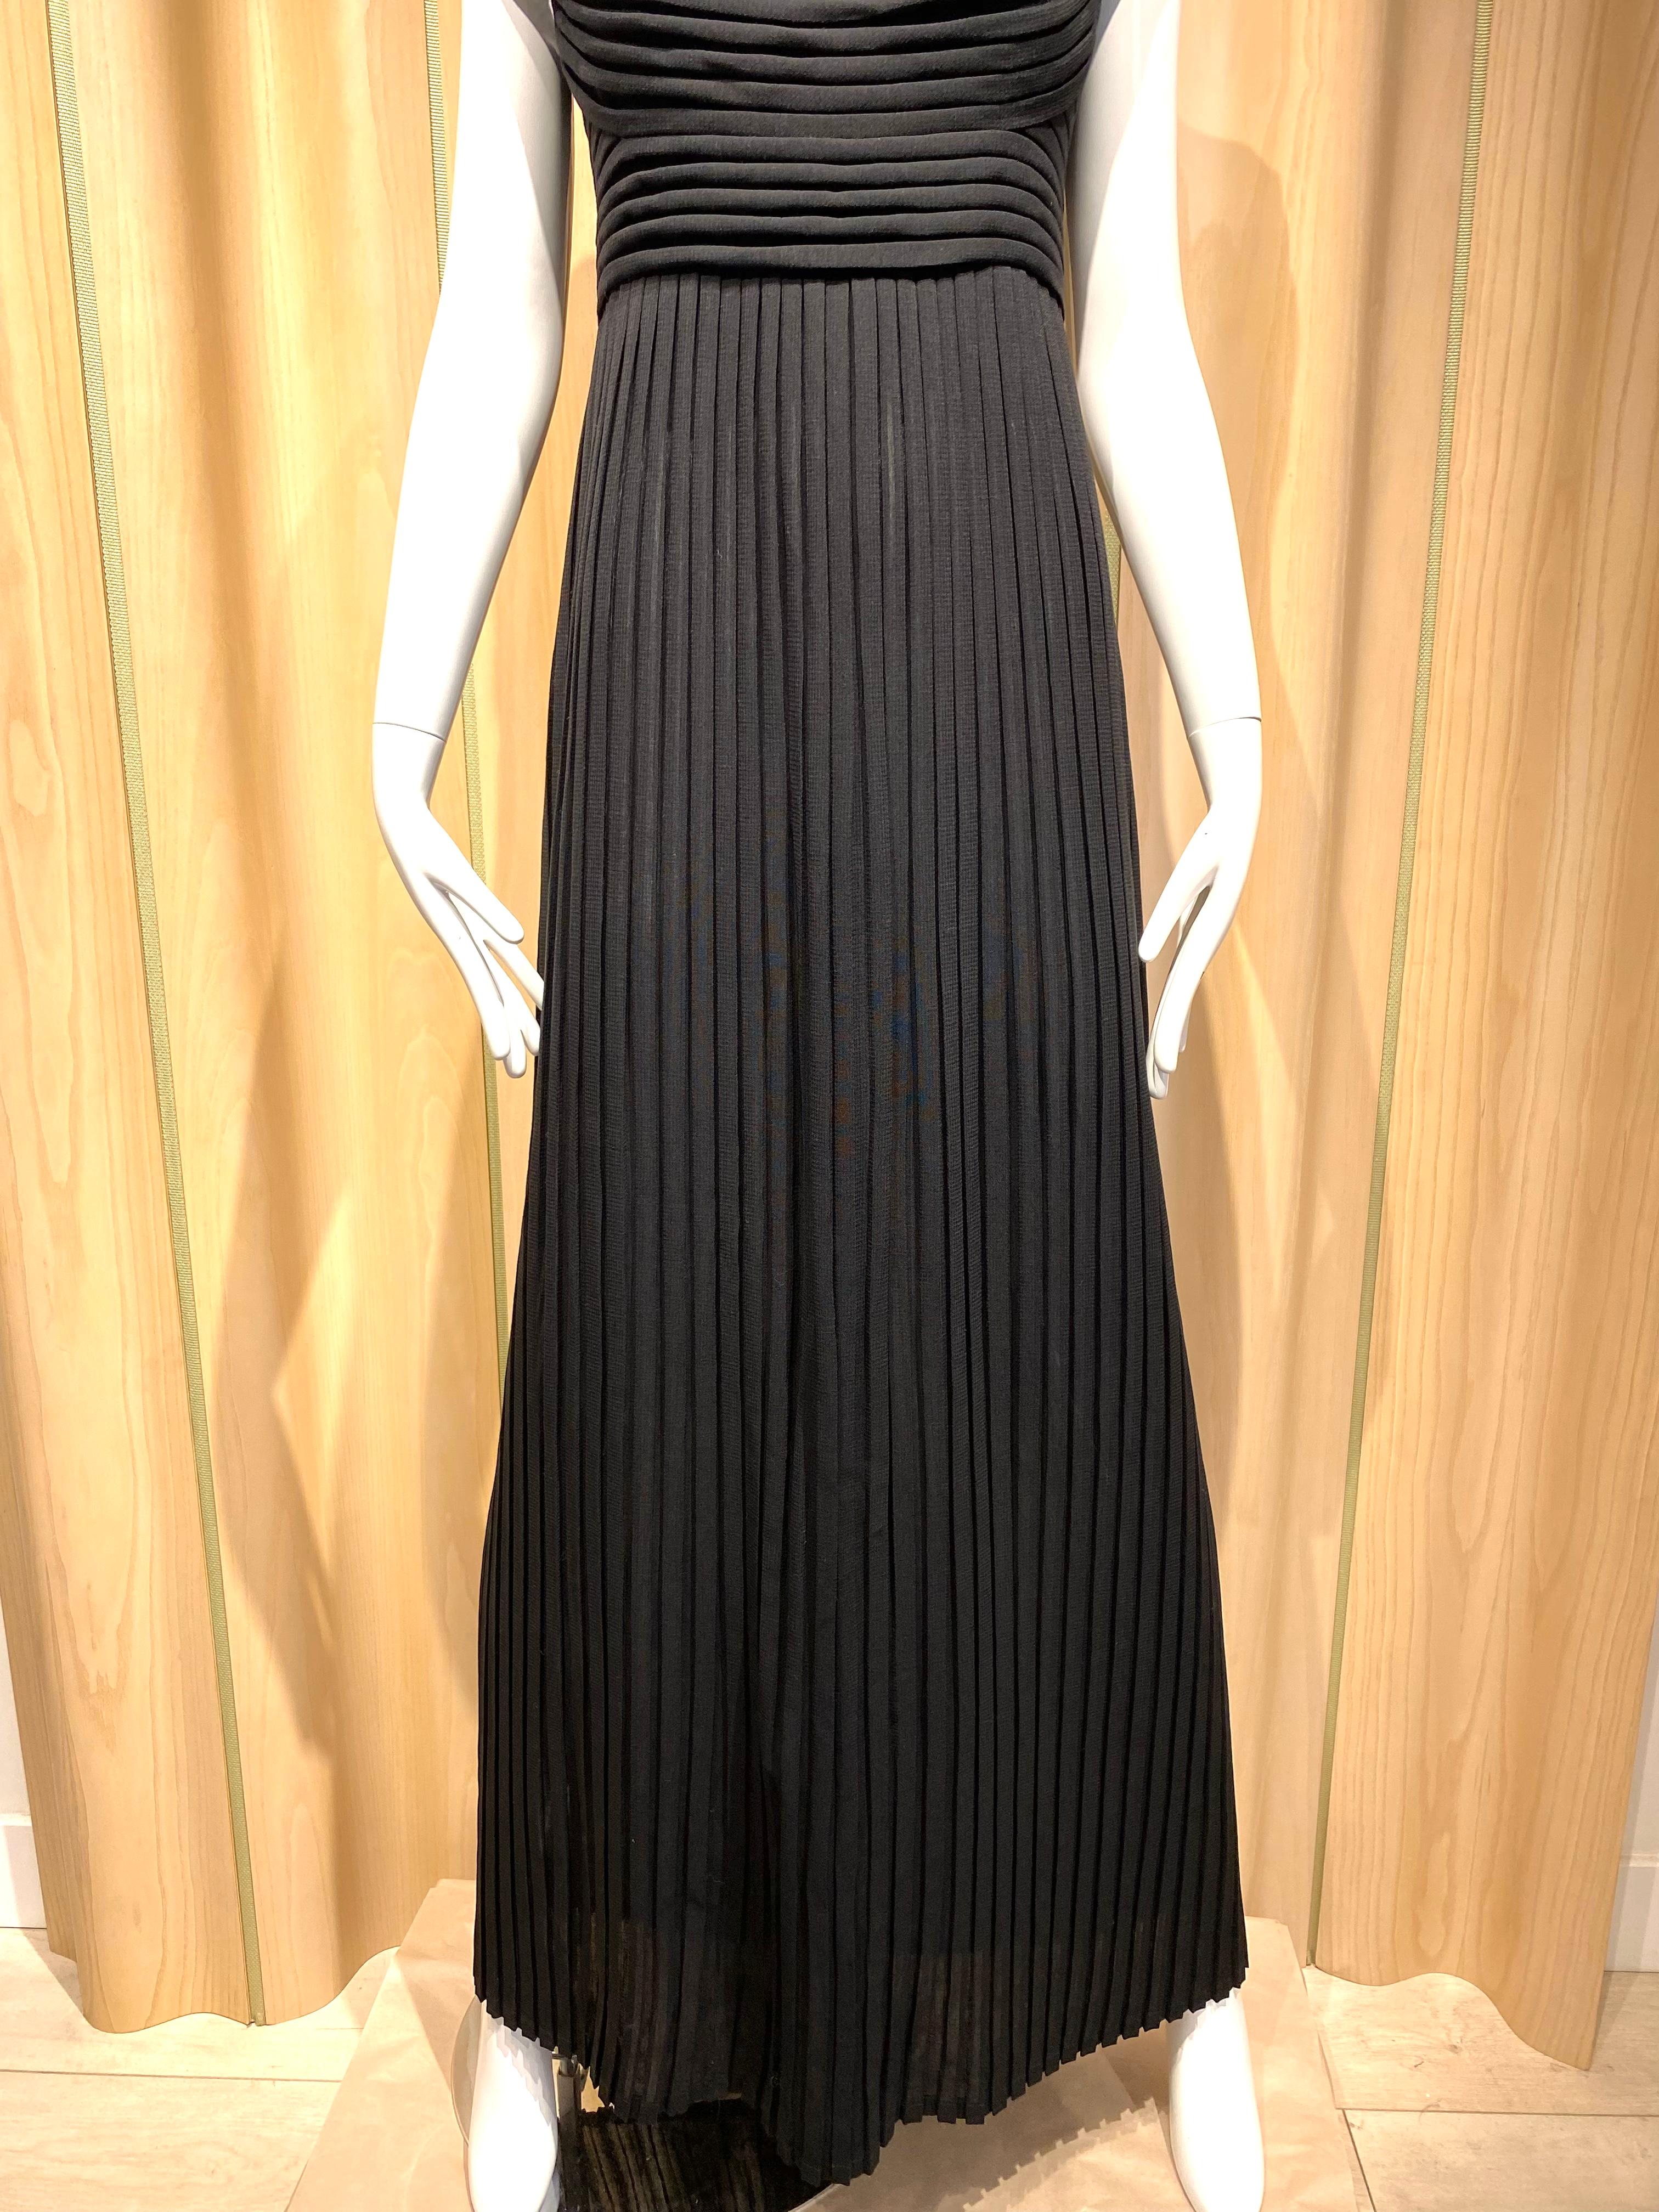 90s Gianfranco Ferre Black Pleated Gown im Angebot 6